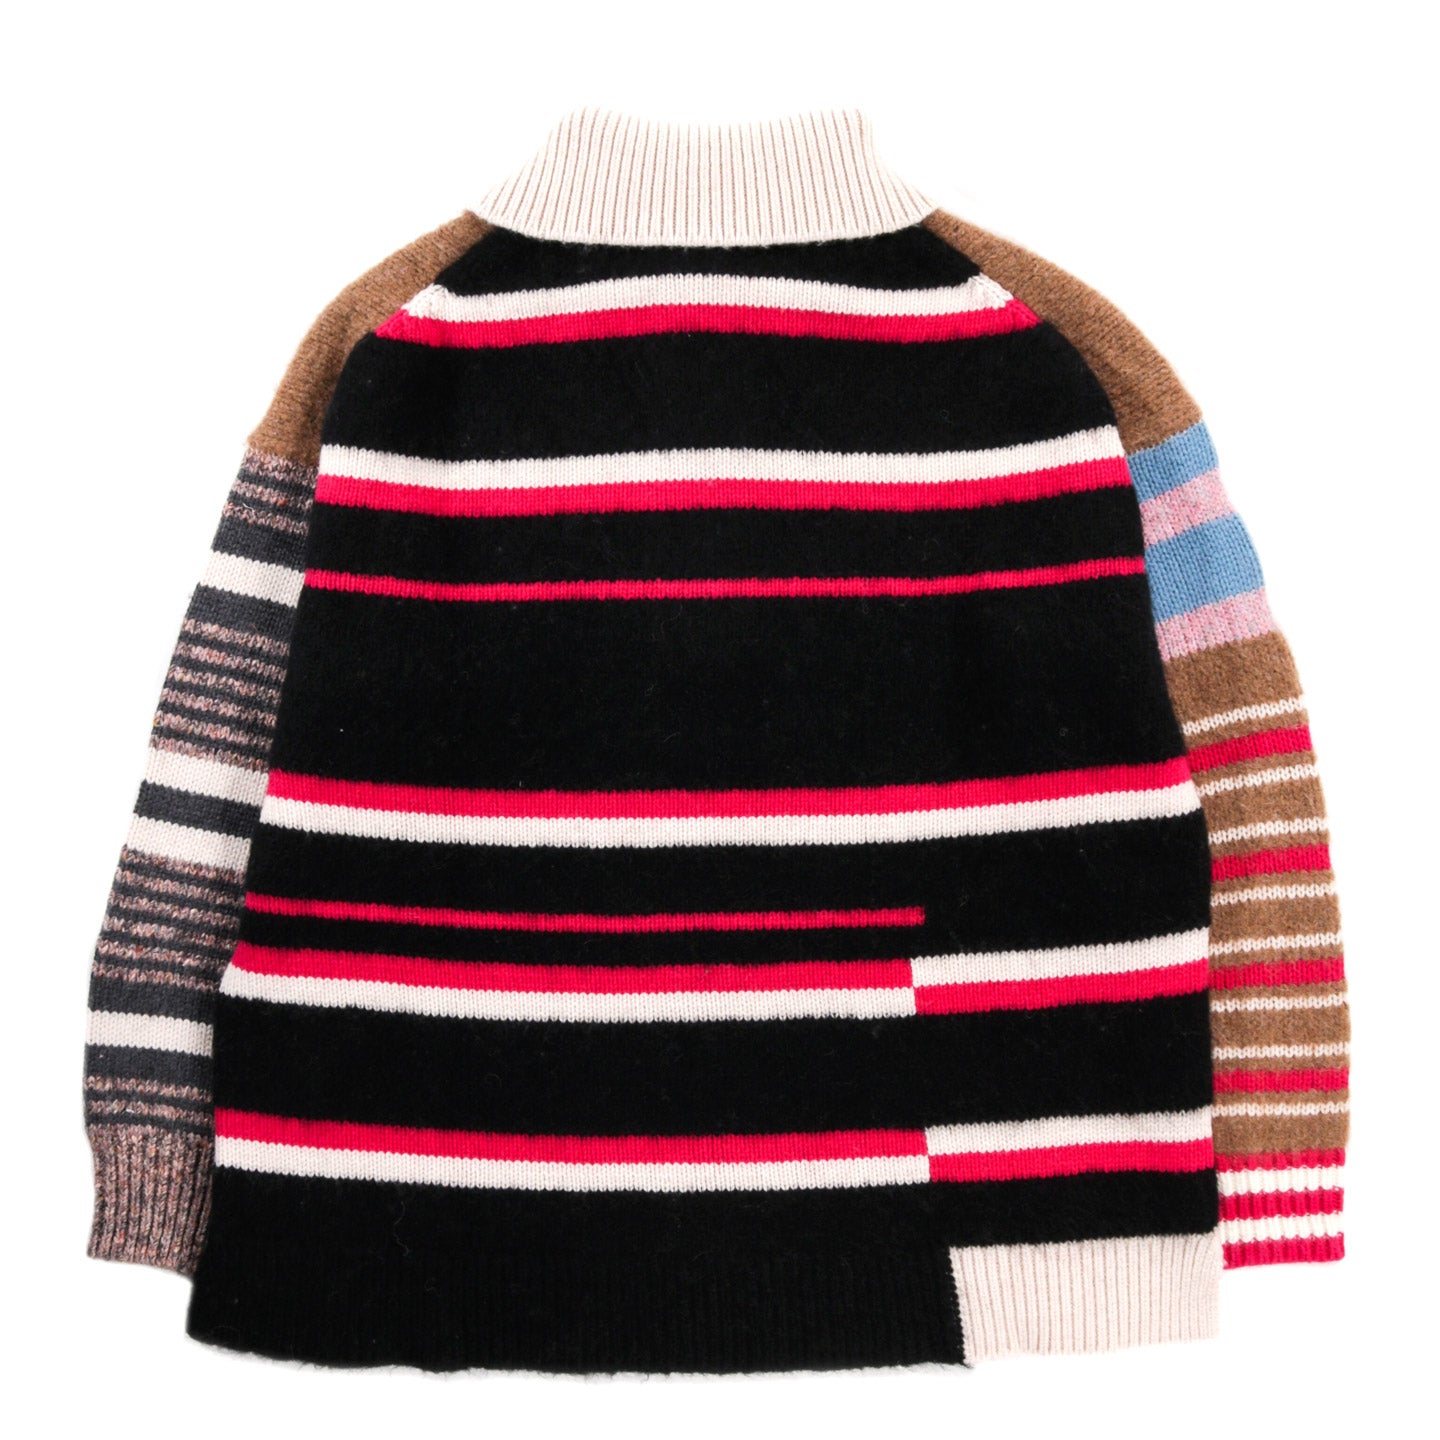 WASTE YARN PROJECT LUCY SWEATER - S (A)